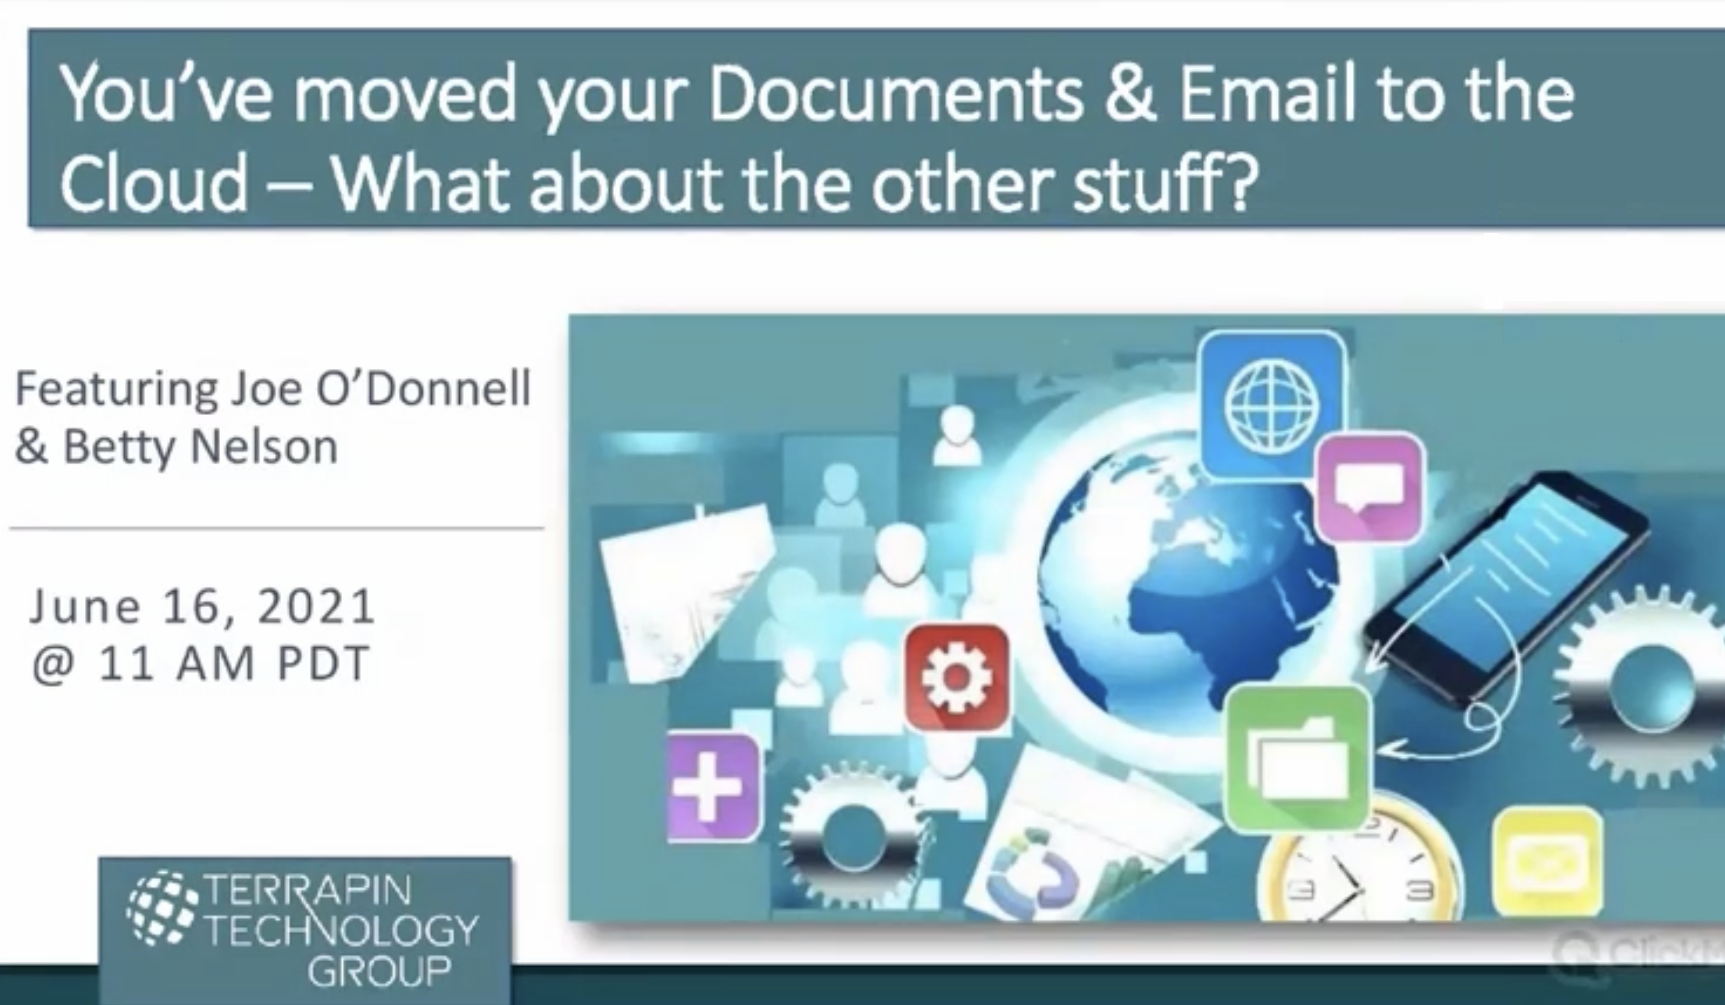 We’ve moved our Documents & Email to the Cloud – What about the other stuff? - Webinar Wednesday